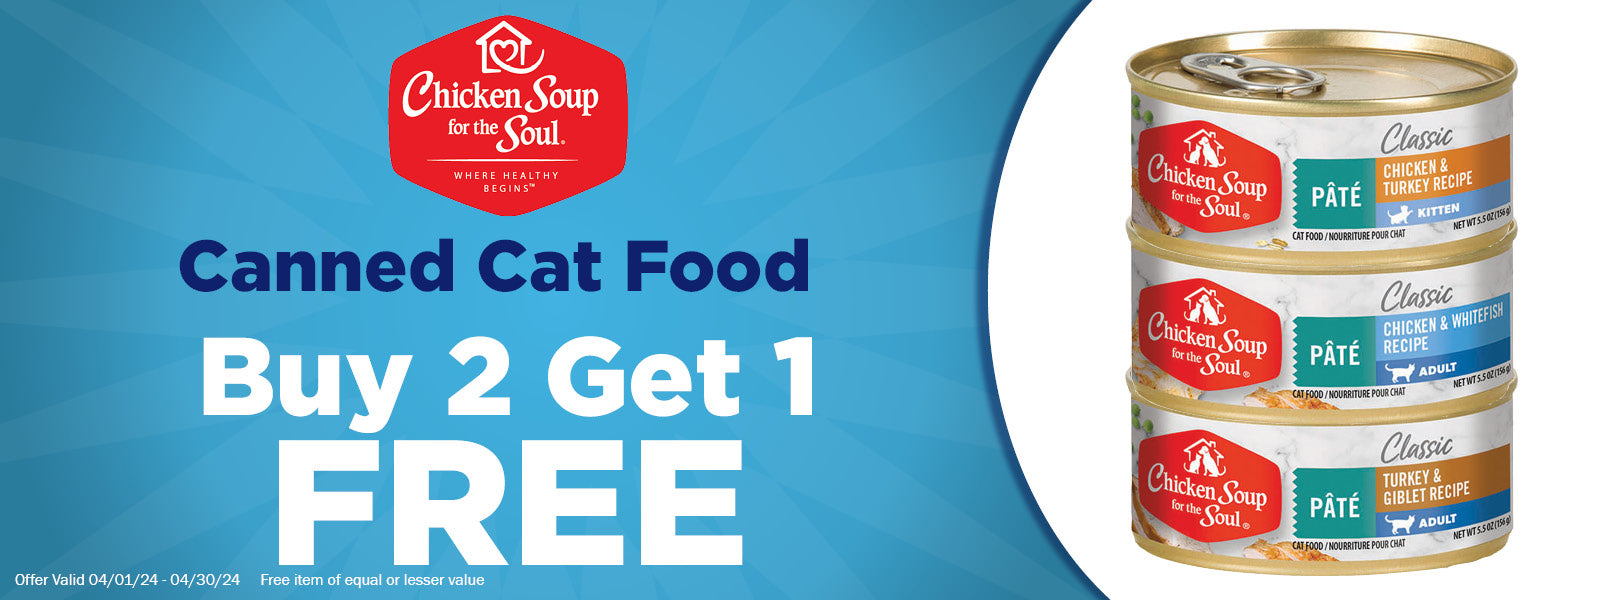 Chicken soup for the Soul Canned Cat Food Buy 2 Get 1 Free